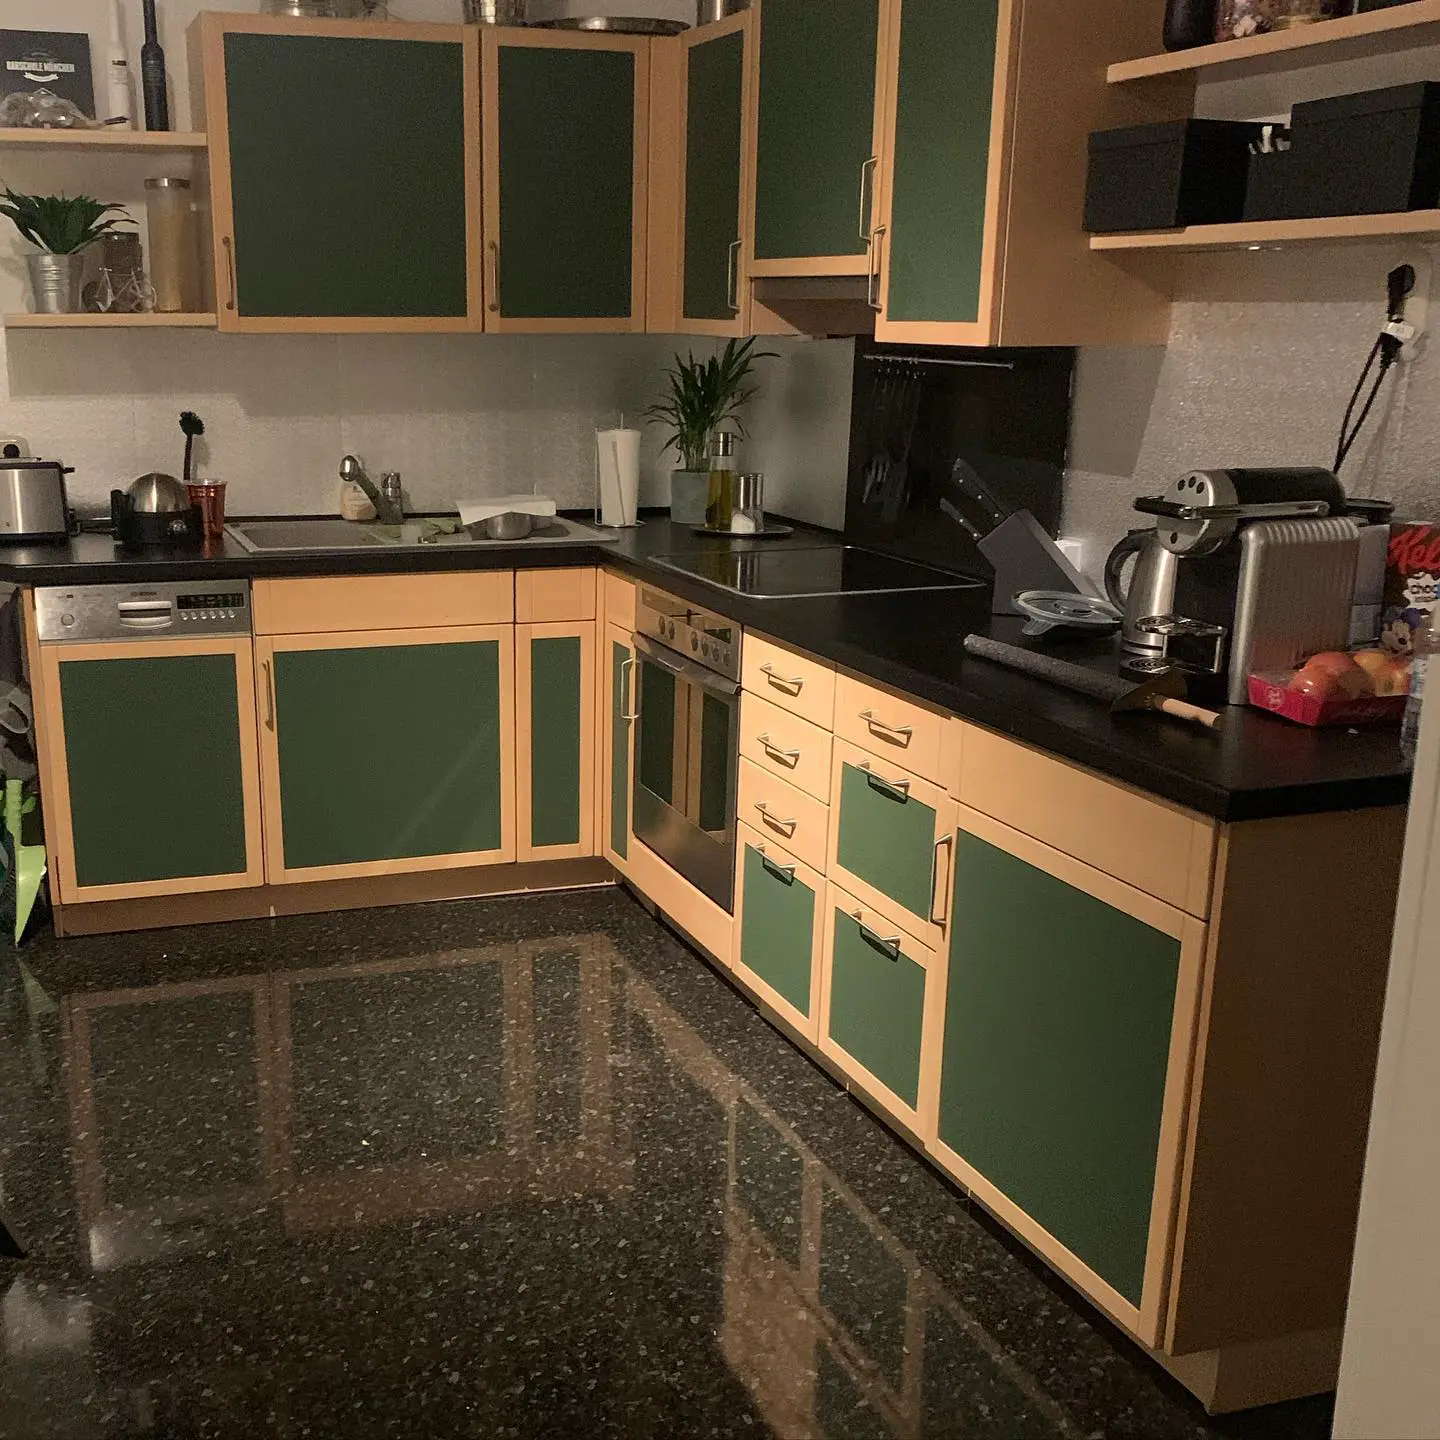 A kitchen with black countertops and green cabinets.